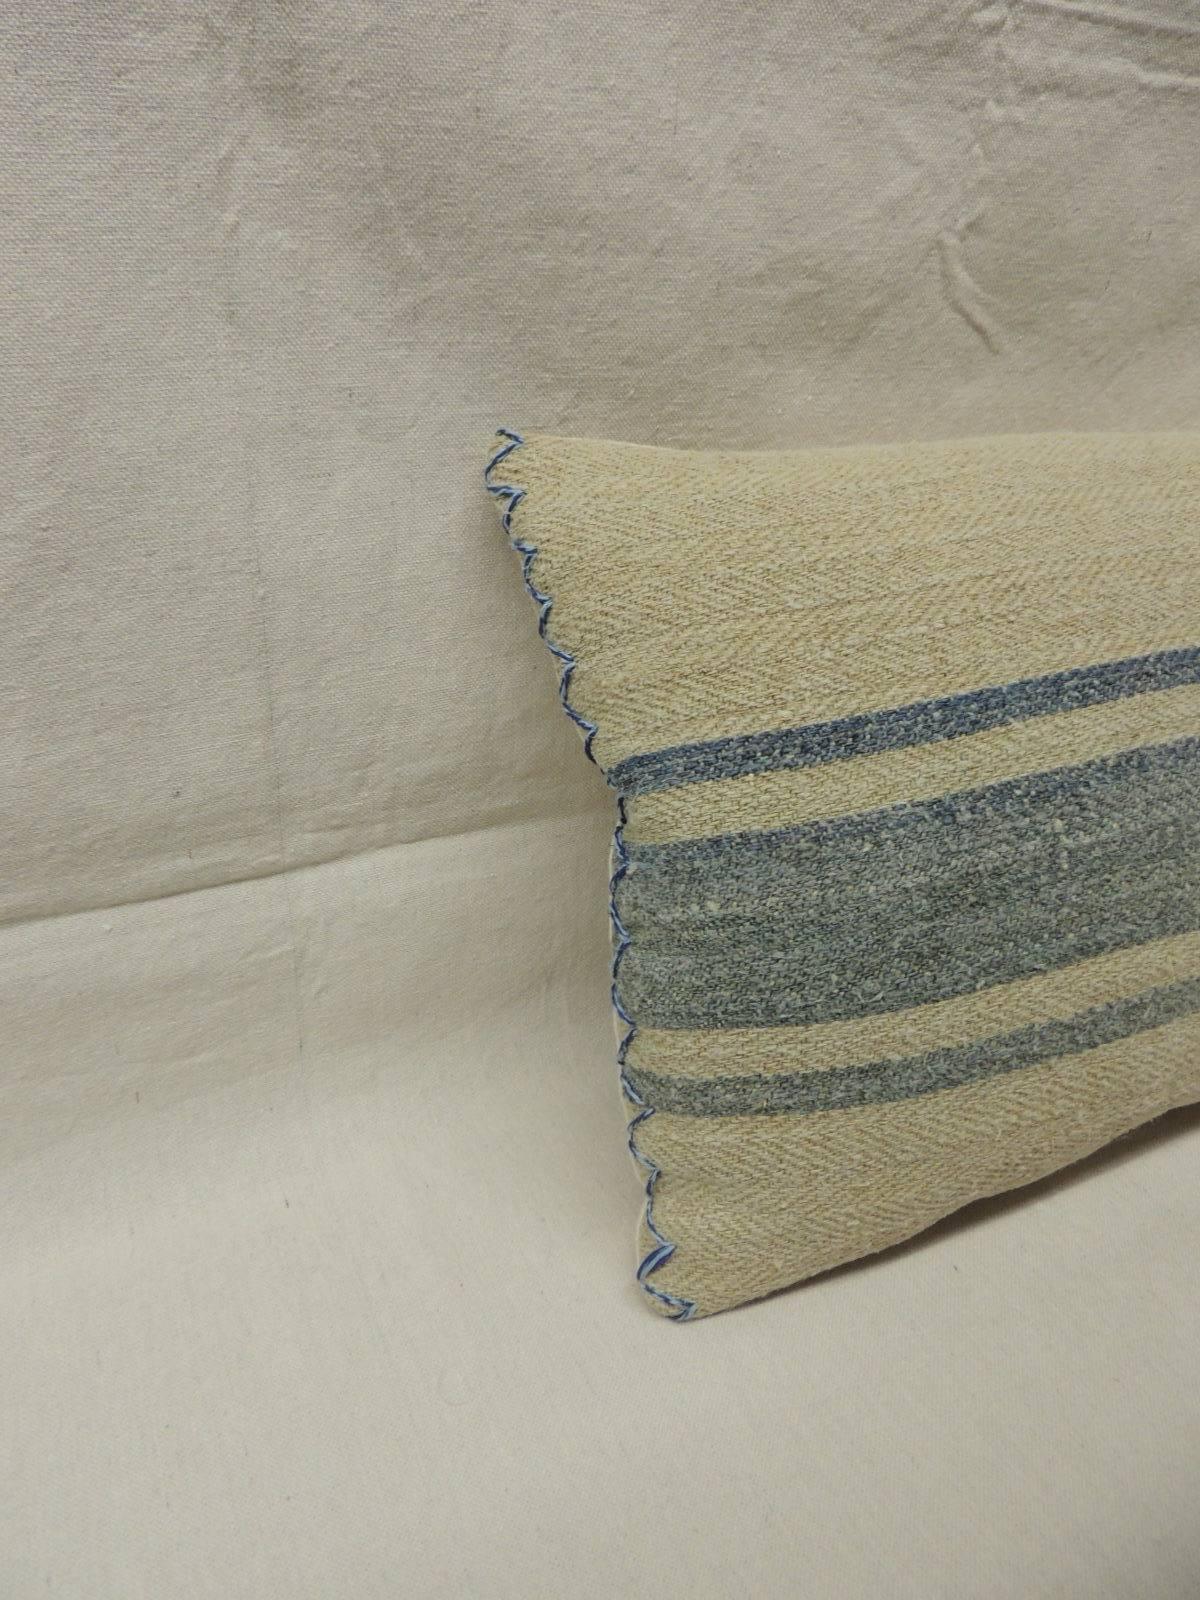 Late 19th century French linen home-spun bolster pillow with blue stripes and blue accent threads on each corner. The backing is in natural linen in shades of soft Wedgwood blue. Hand-crafted and designed in the USA with custom made pillow inserts